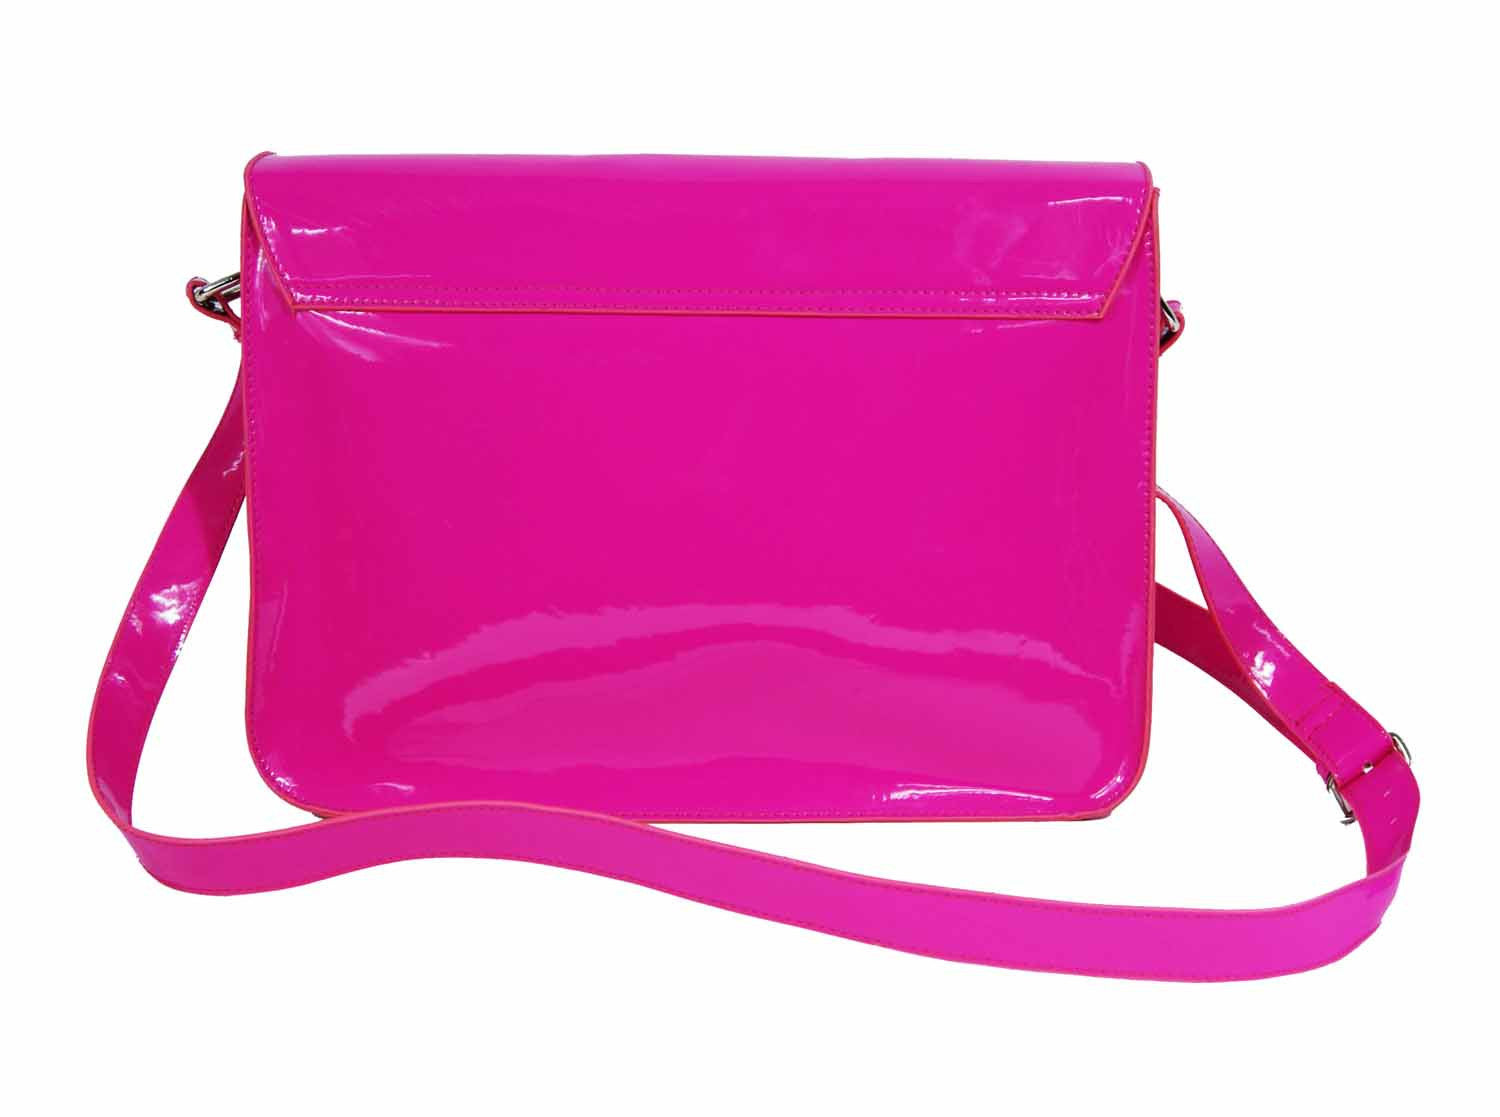 Patent Leather Small Cross Body Bag: AW0020